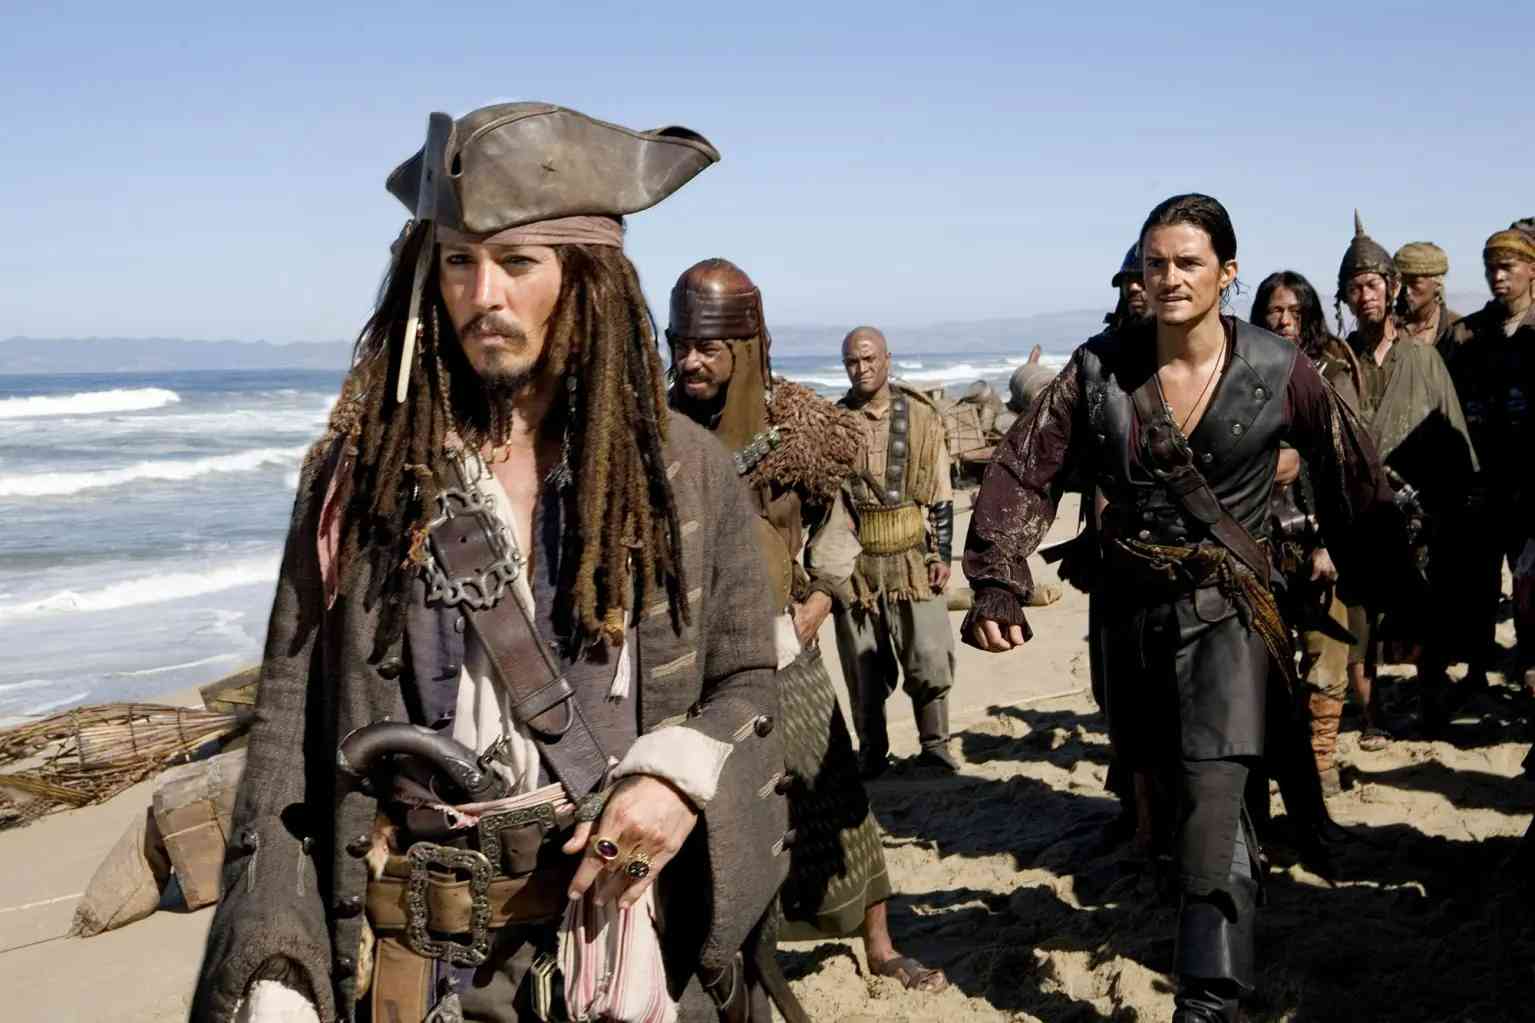 Pirates-of-the-Caribbean:-At-World's-End-in-New Zealand